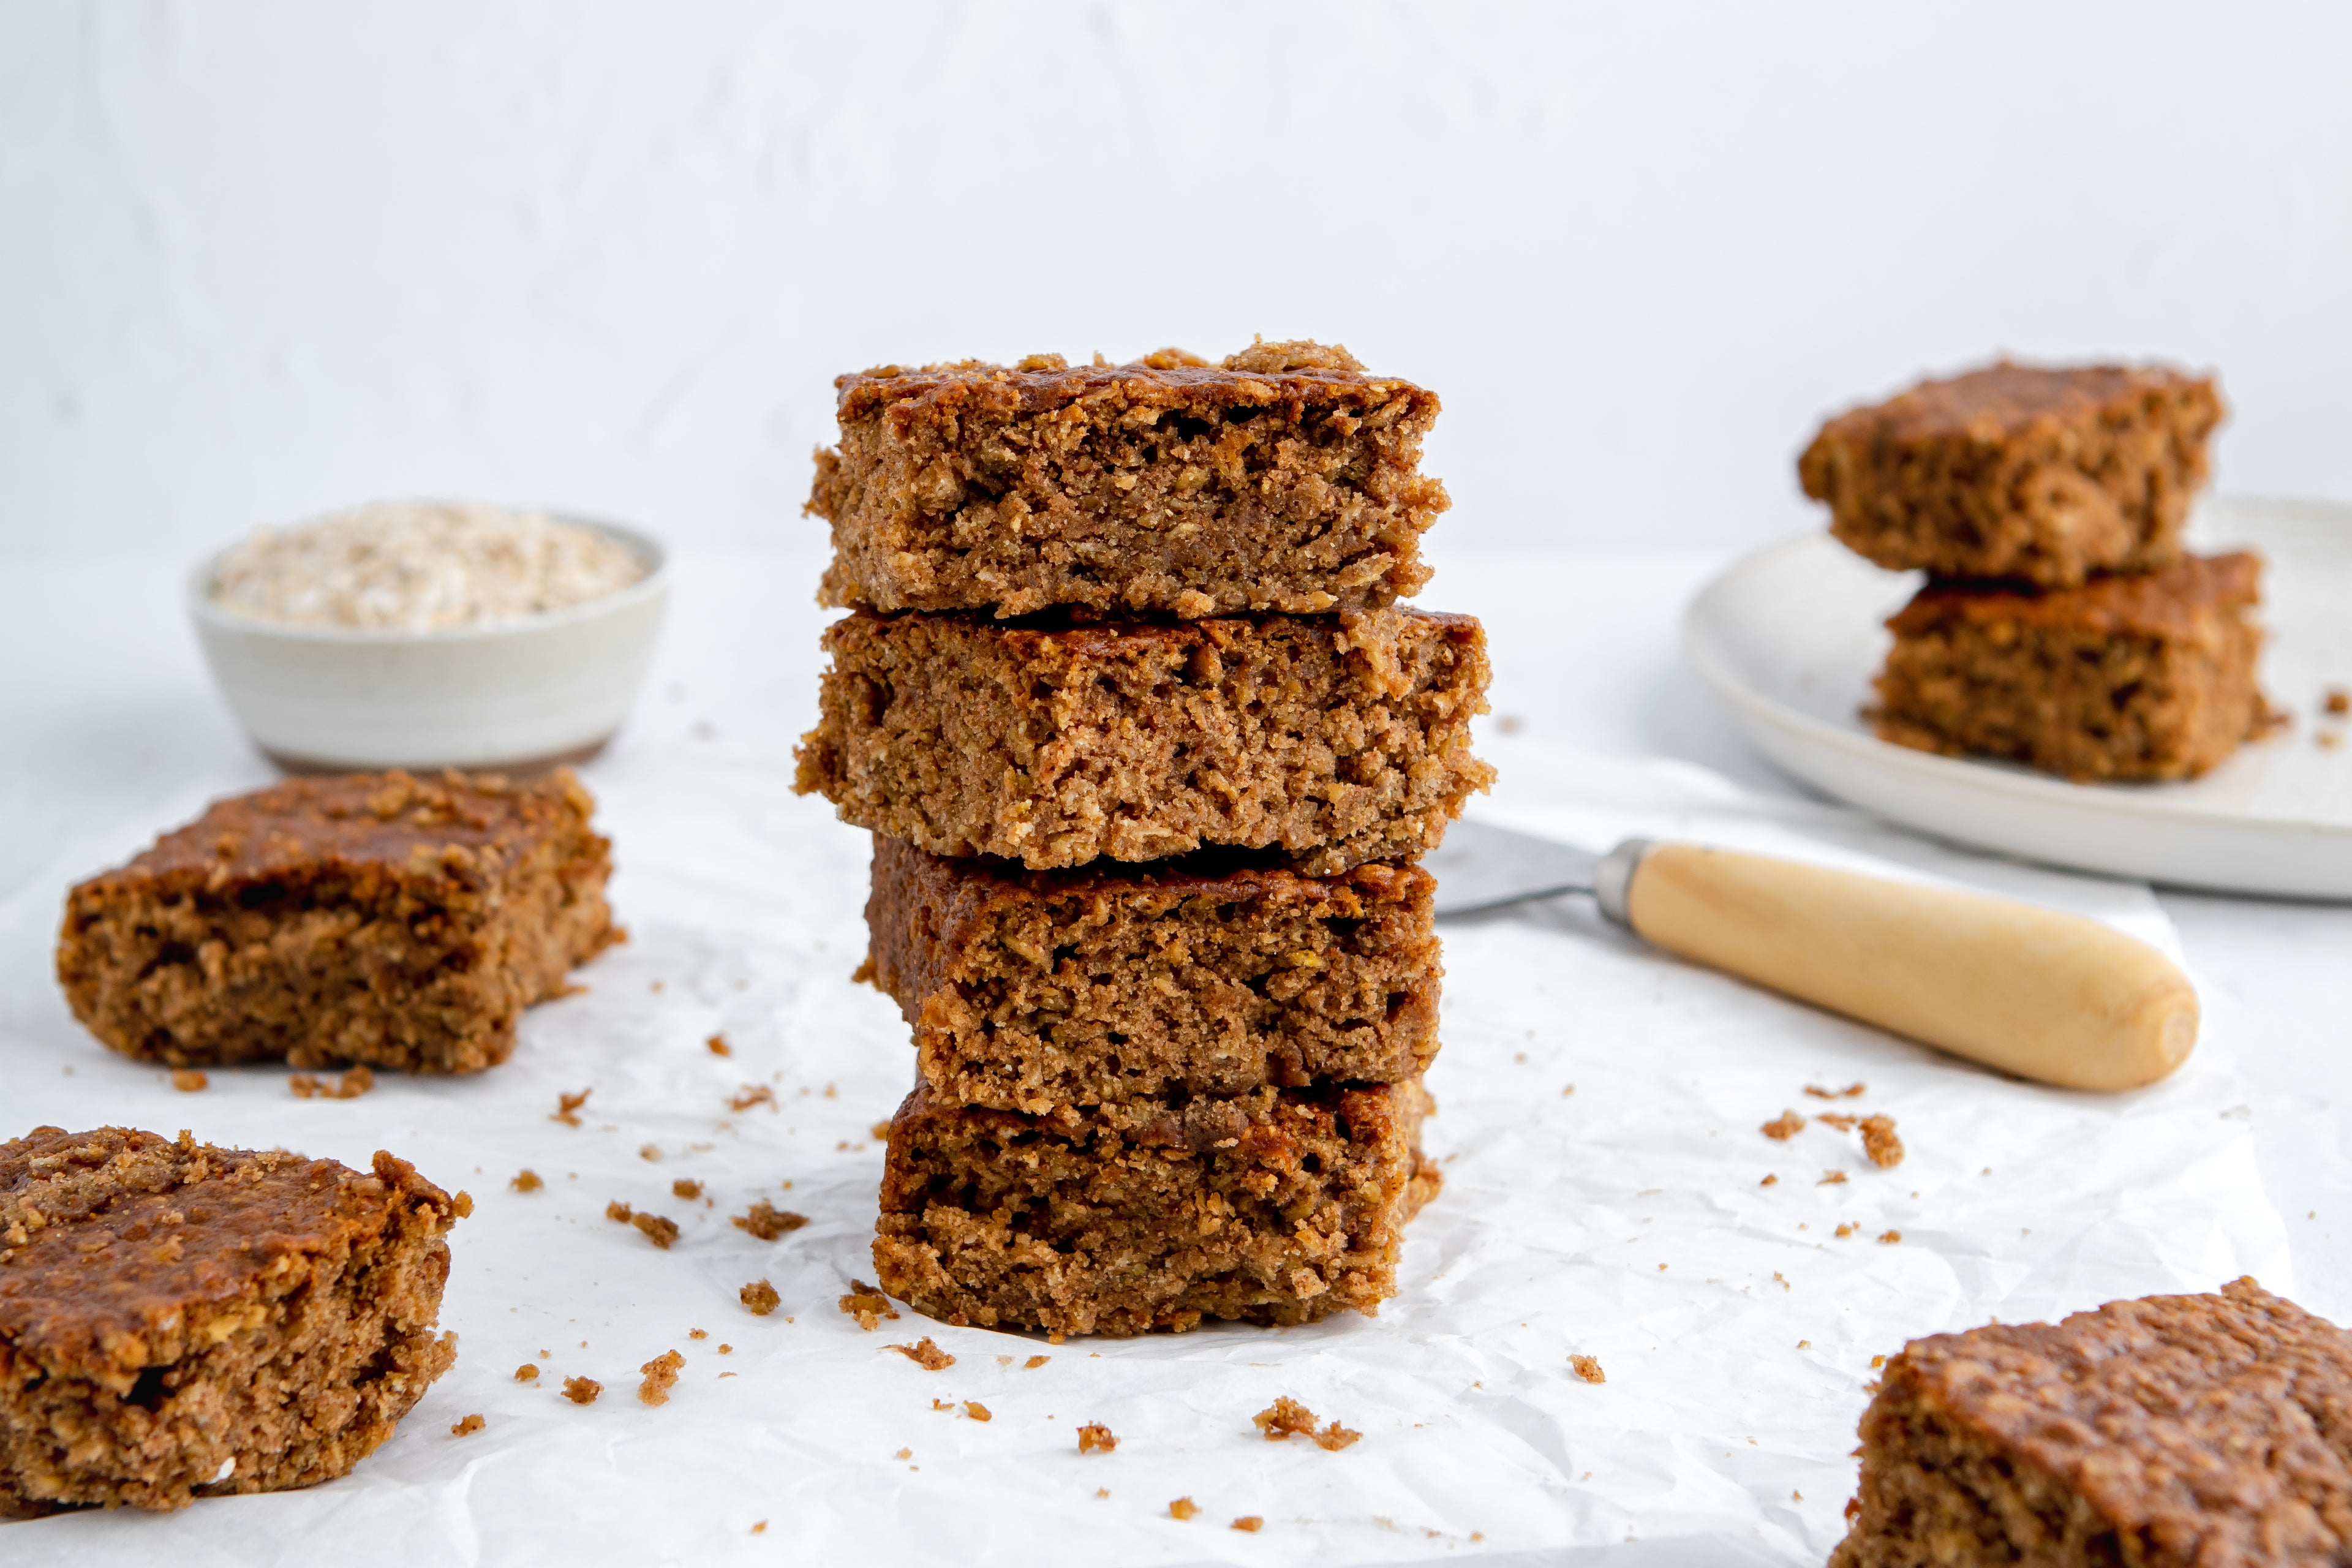 Squares of Sticky Yorkshire Parkin stacked on top of each other, surrounded by crumbs with a bowl of oats in the background